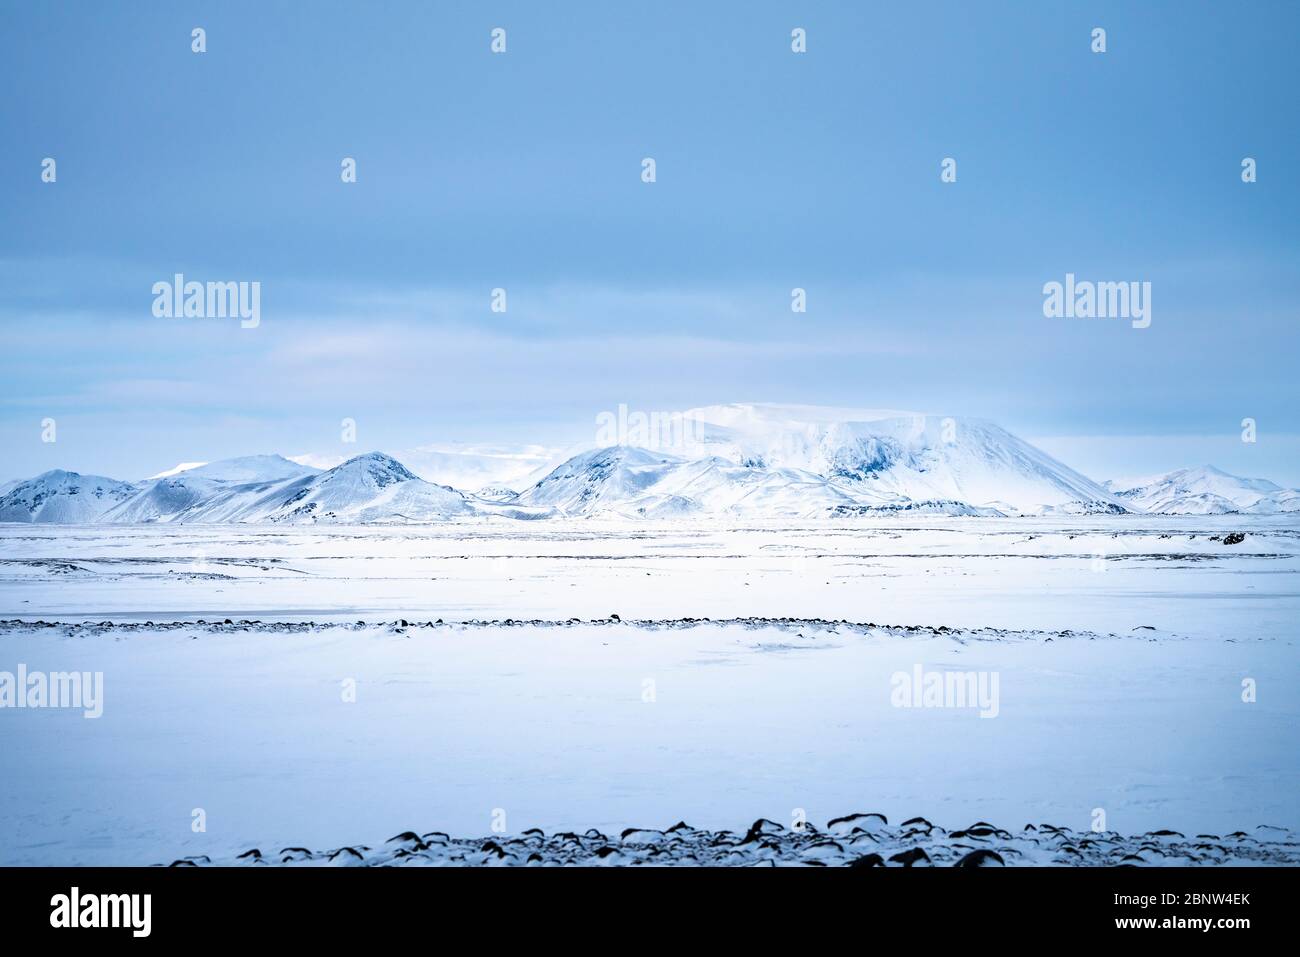 Snow covered mountains and Icelandic volcanic landscape in winter near Lake Myvatn, north east Iceland Stock Photo